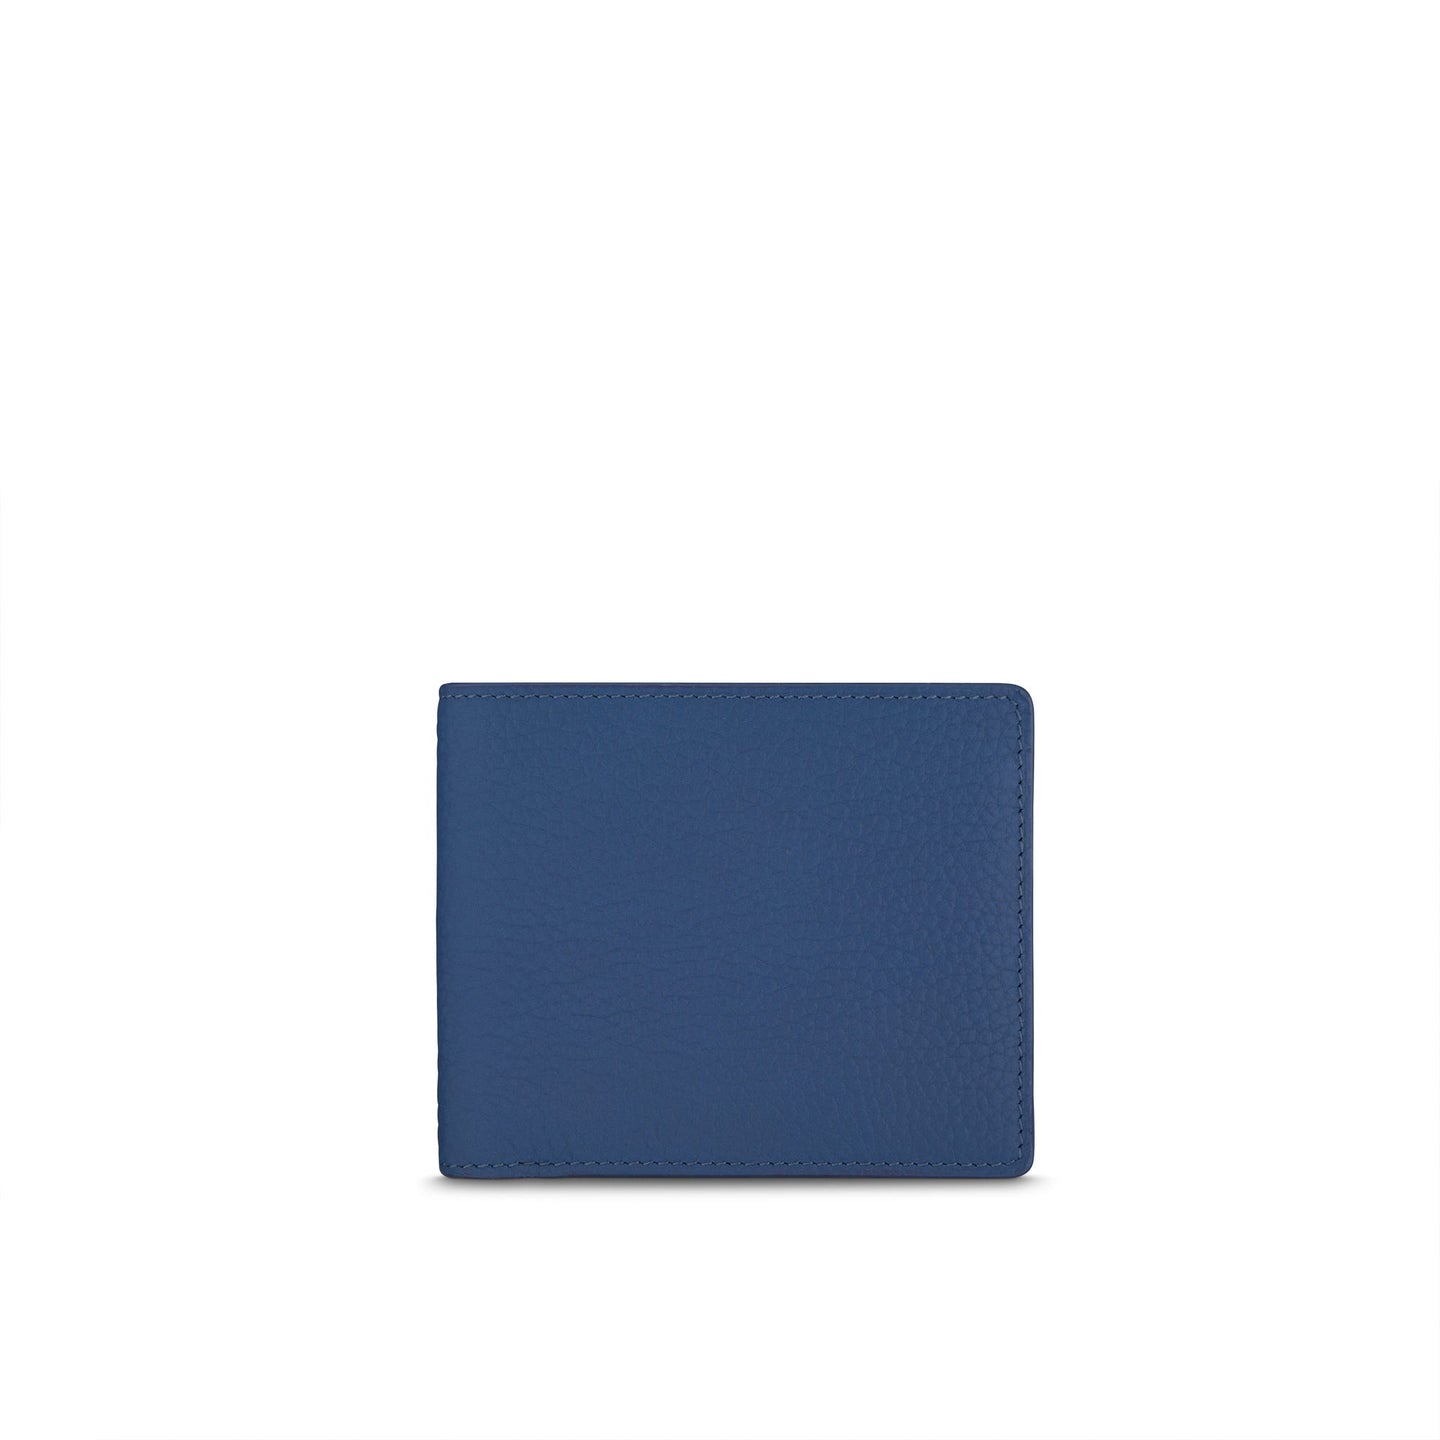 GMT Billfold Bi-colour Coin Wallet in Soft Grain Leather